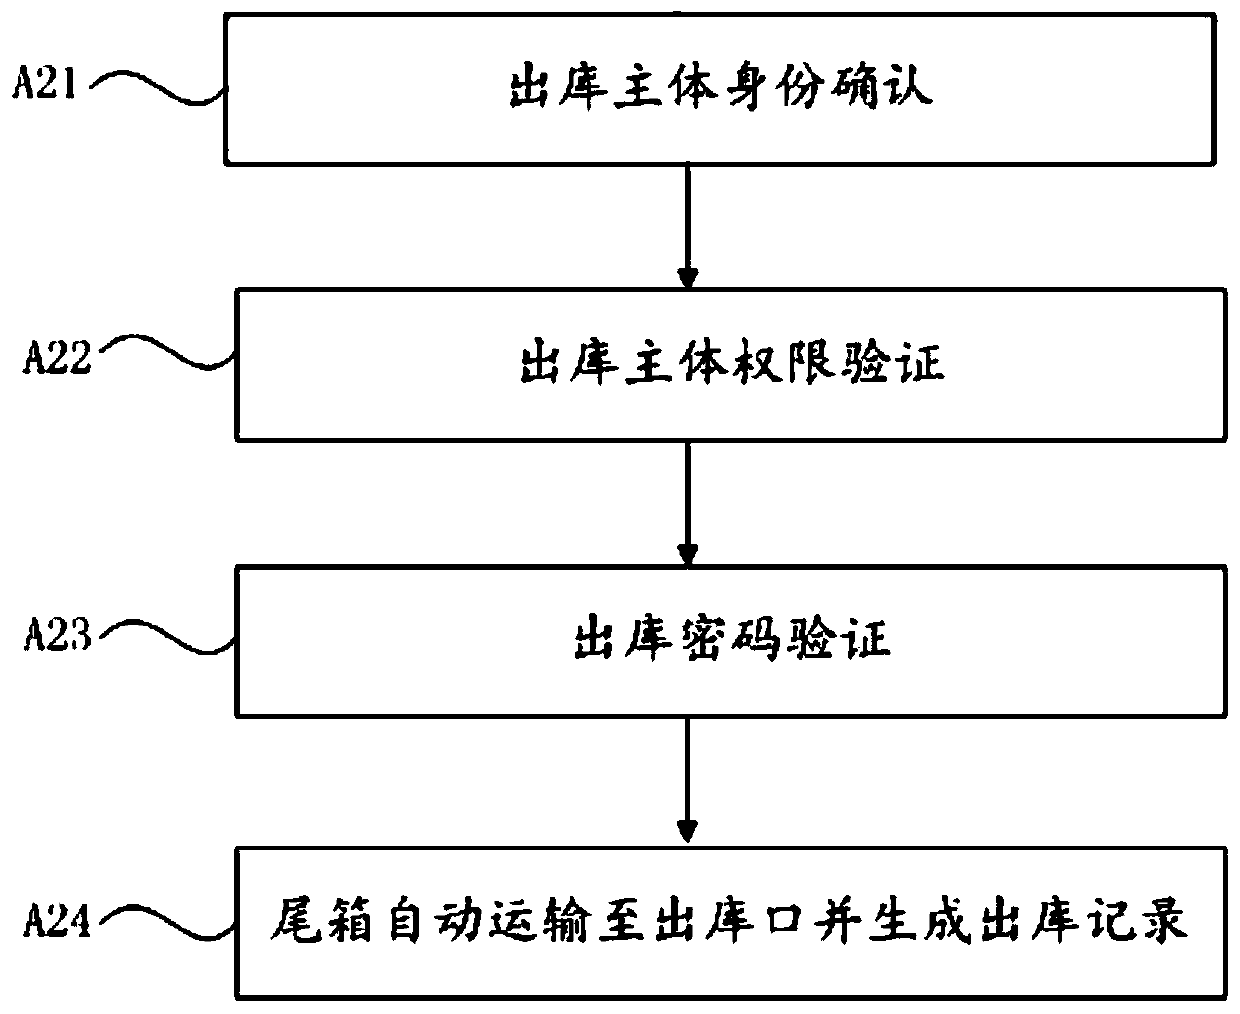 Automatic access recognition method and device for bank trunk library, computer device and storage medium